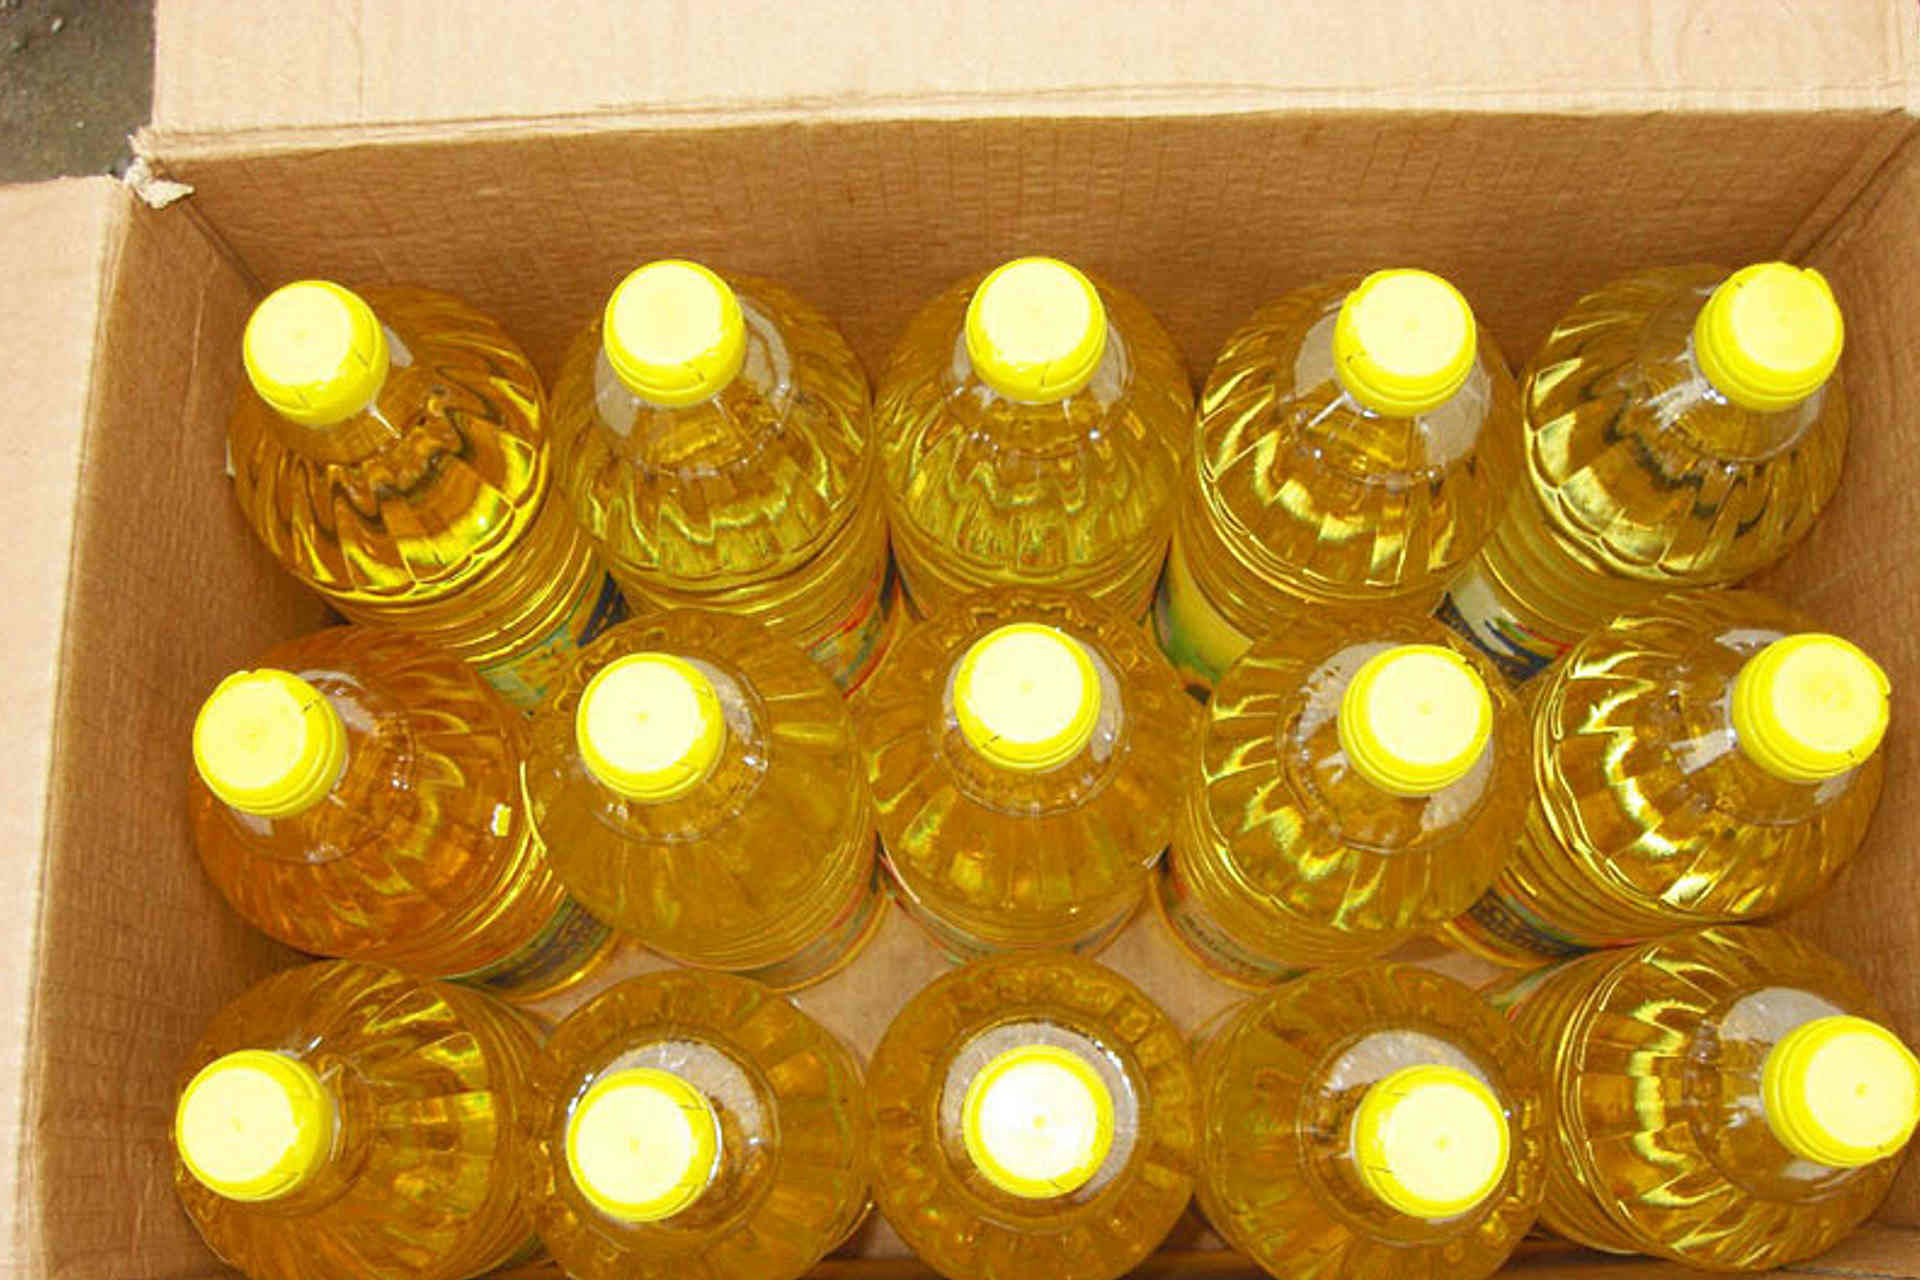 Palm oil Biodiesel making & bottling picture